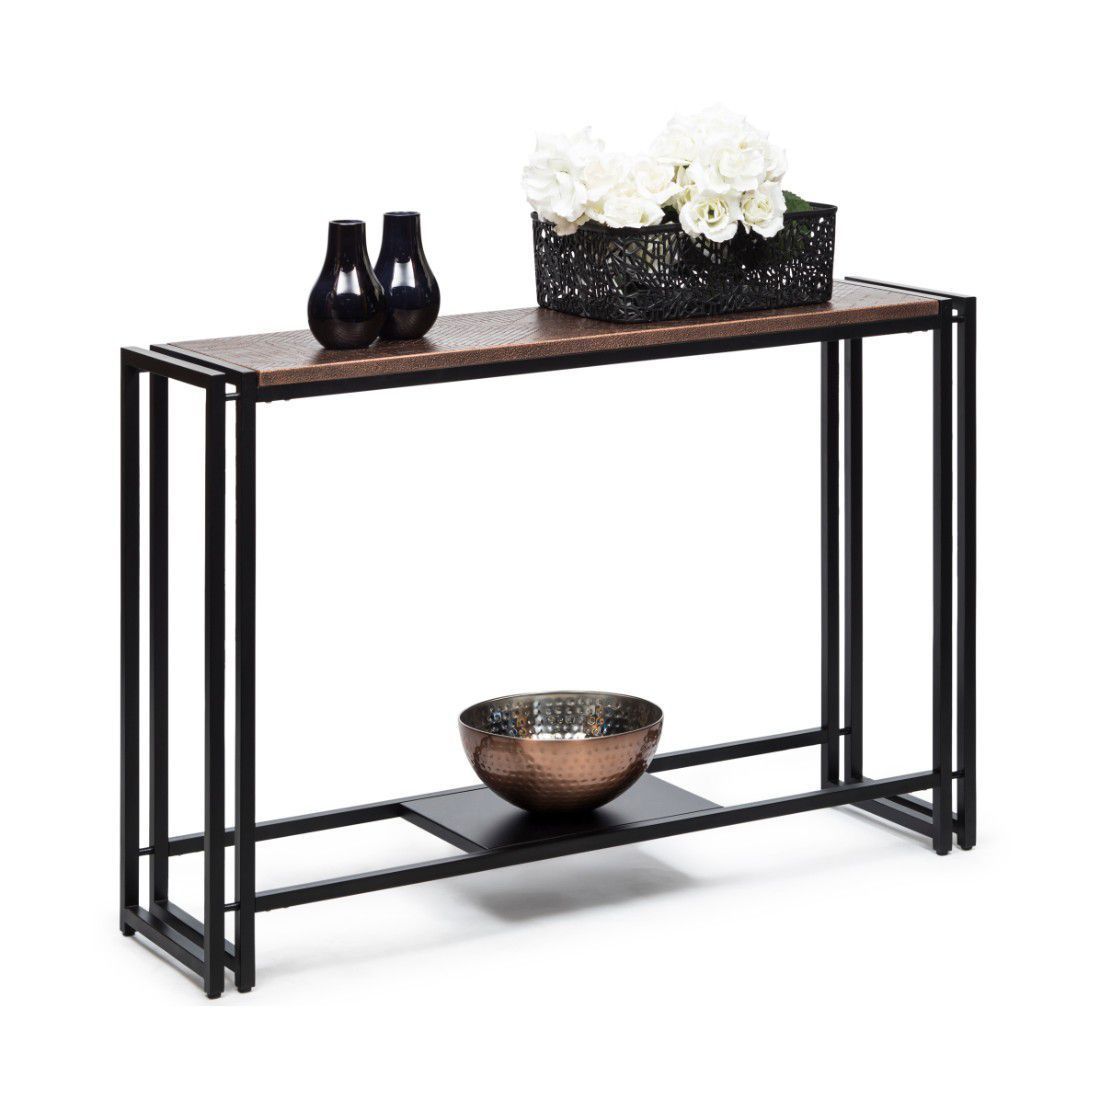 Slim Contemporary Iron Hallway Console Table With Textured Intended For Aged Black Iron Console Tables (View 8 of 20)